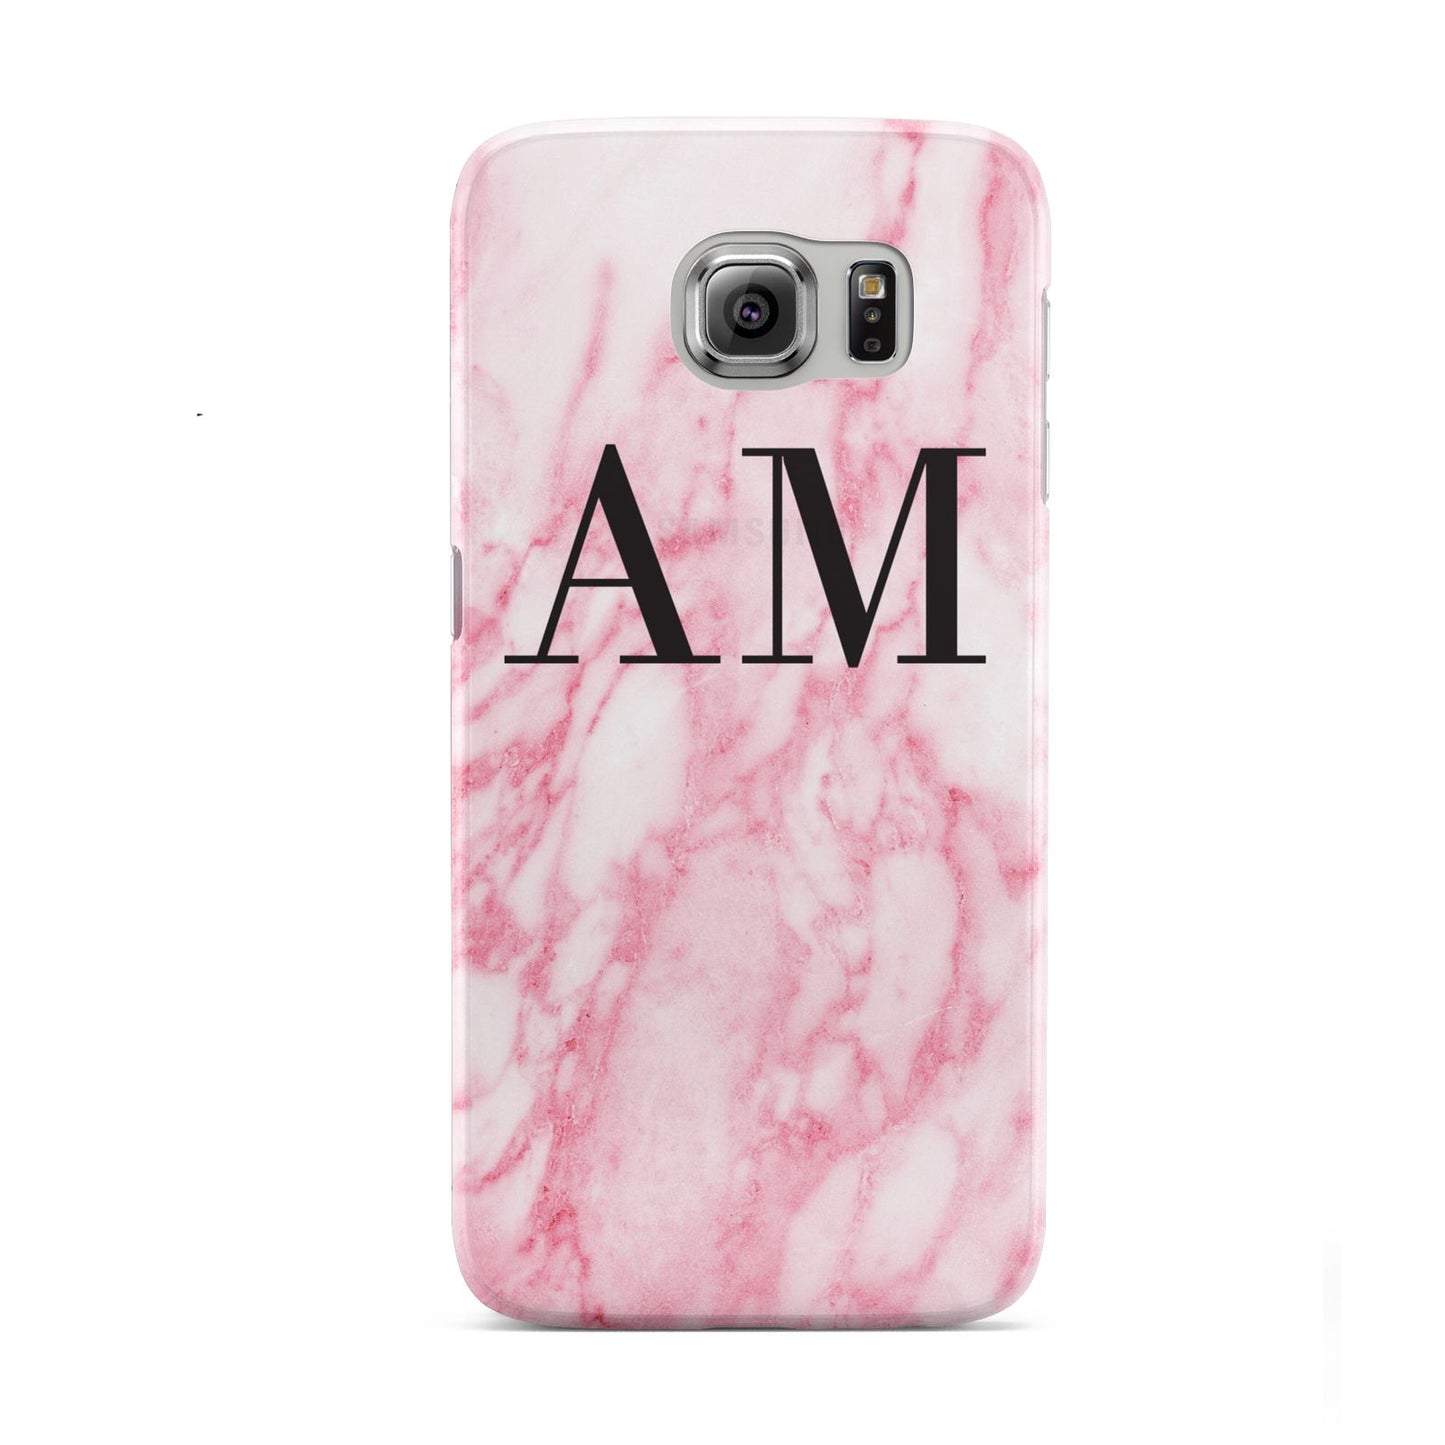 Personalised Pink Marble Monogrammed Samsung Galaxy S6 Case